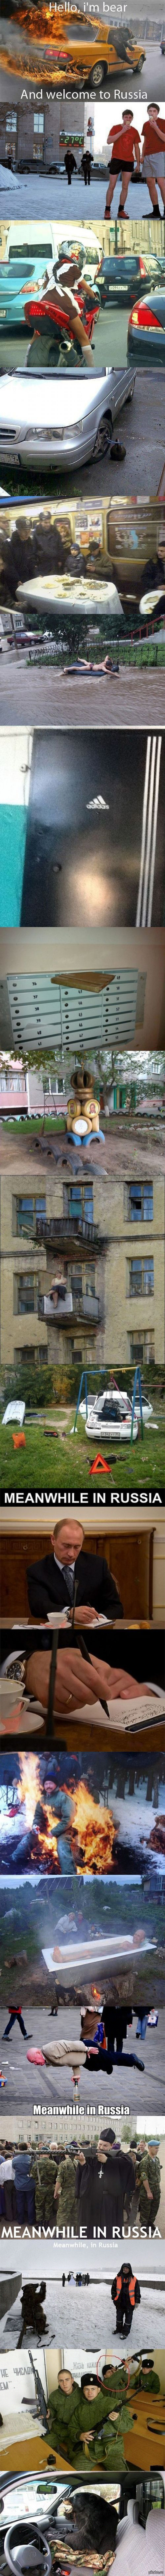 Meanwhile In Russia Part 2